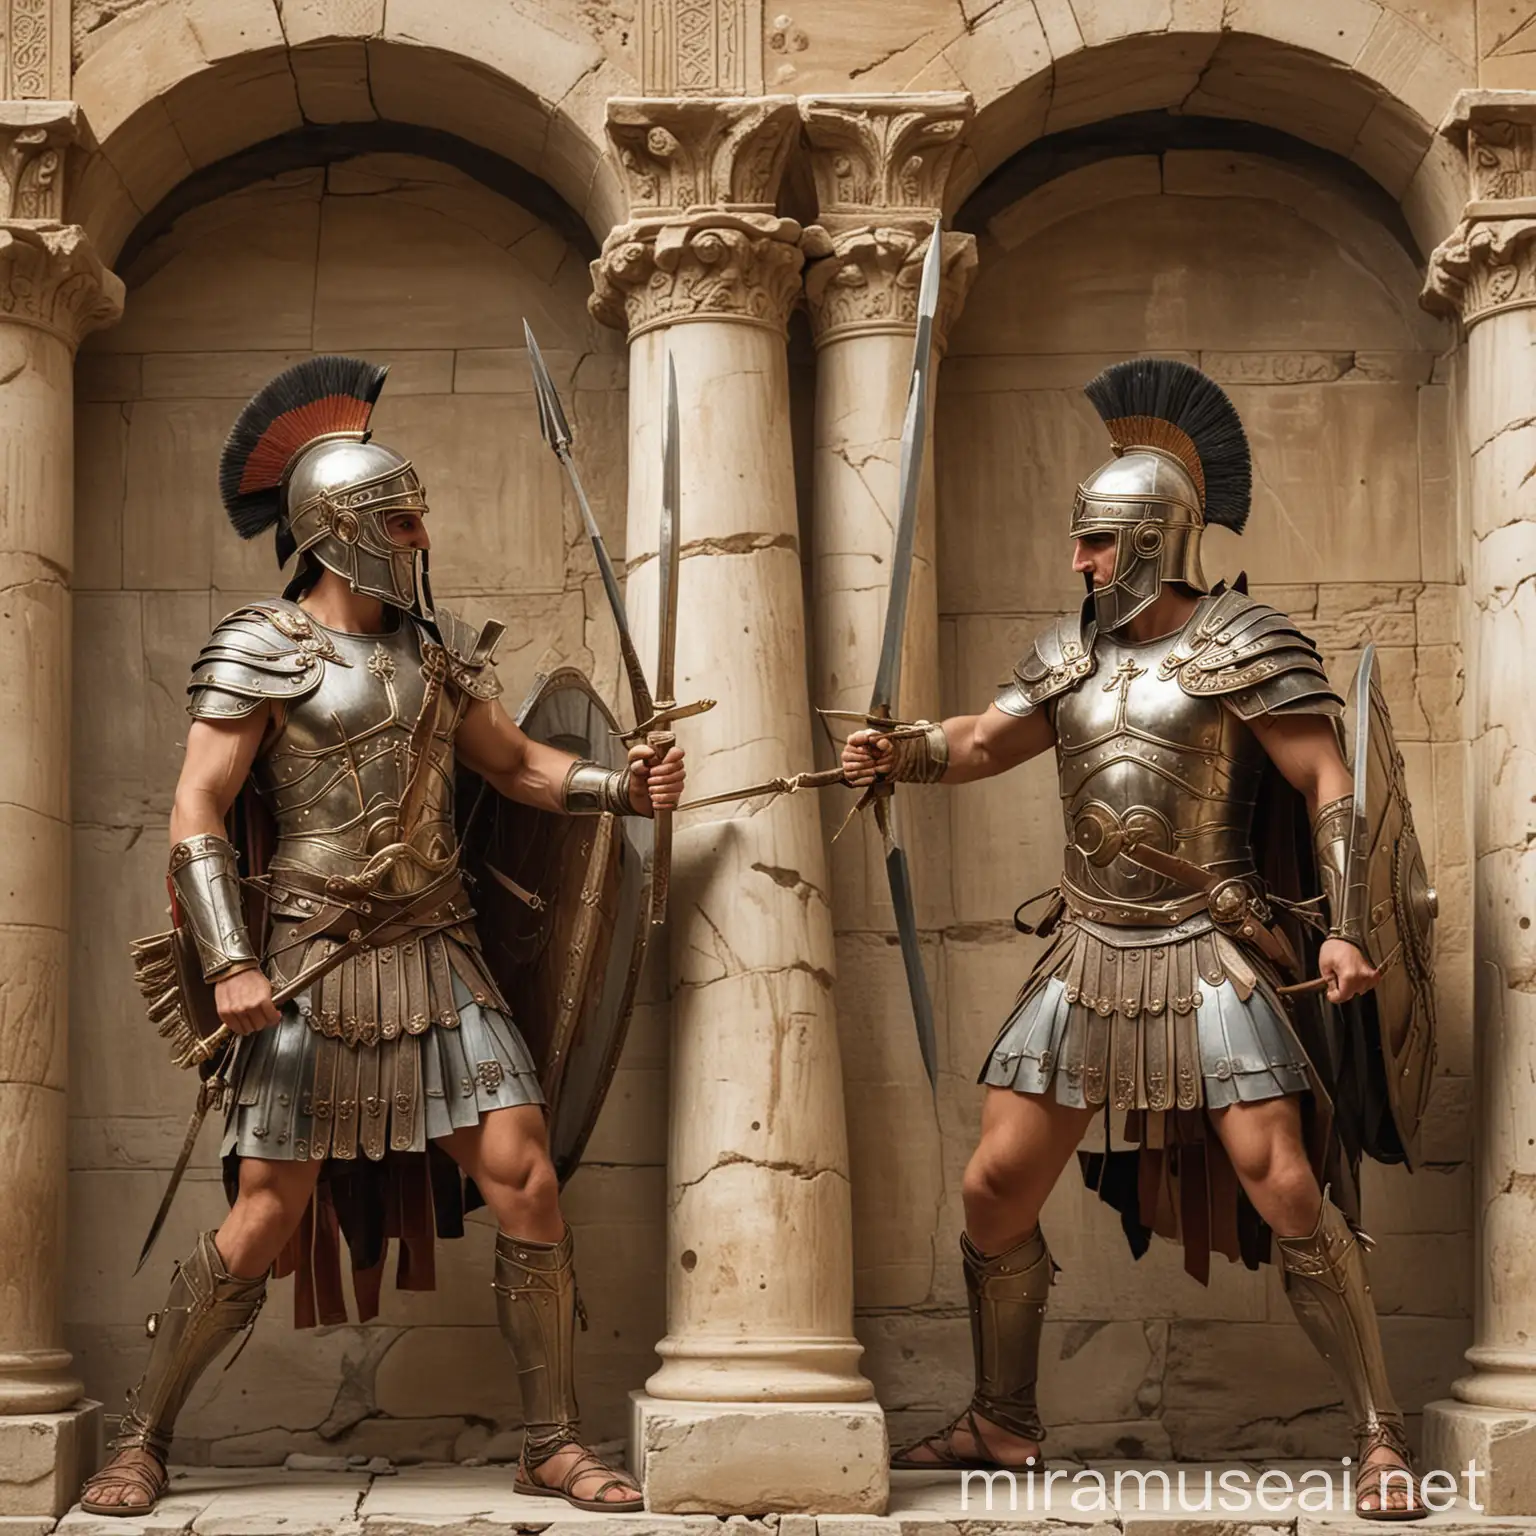 two greek princes in armour with spears and white shields battling in front of the walls of Thebes for the throne. The battle happened at dawn. Both are pierced by the others' spear.